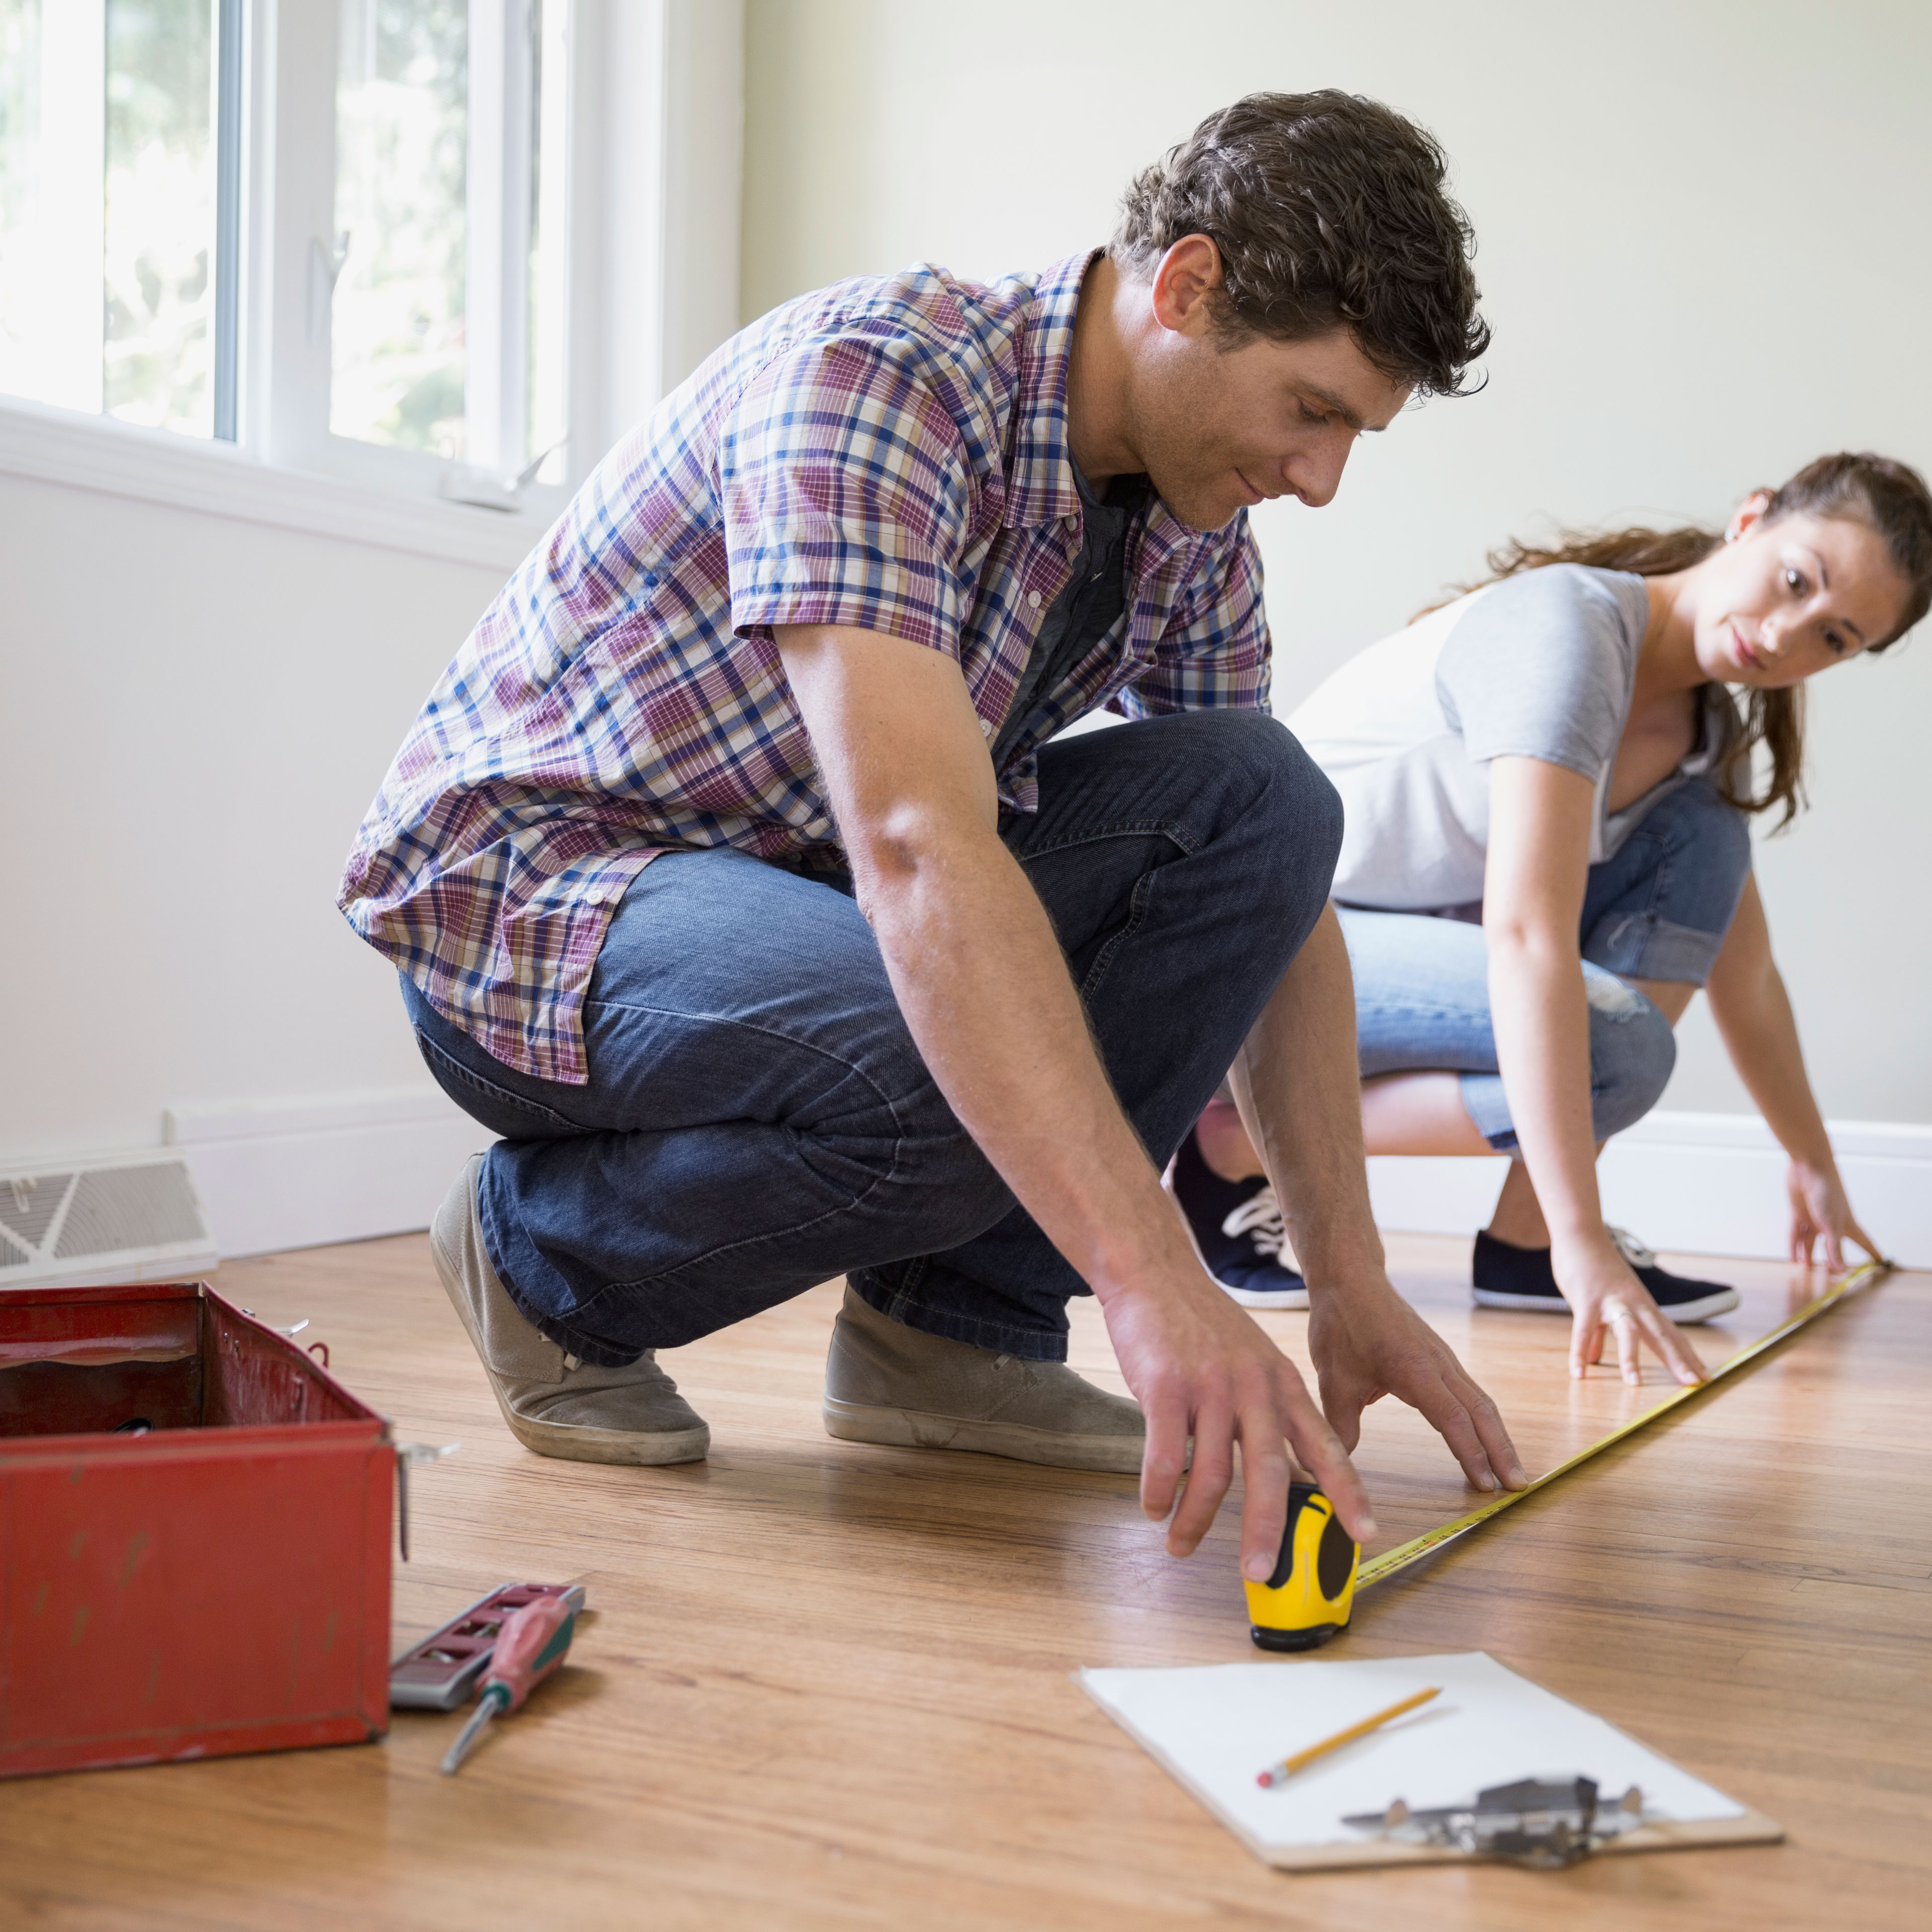 5 Basic Tools New Homeowners Should Keep in Their Toolkit